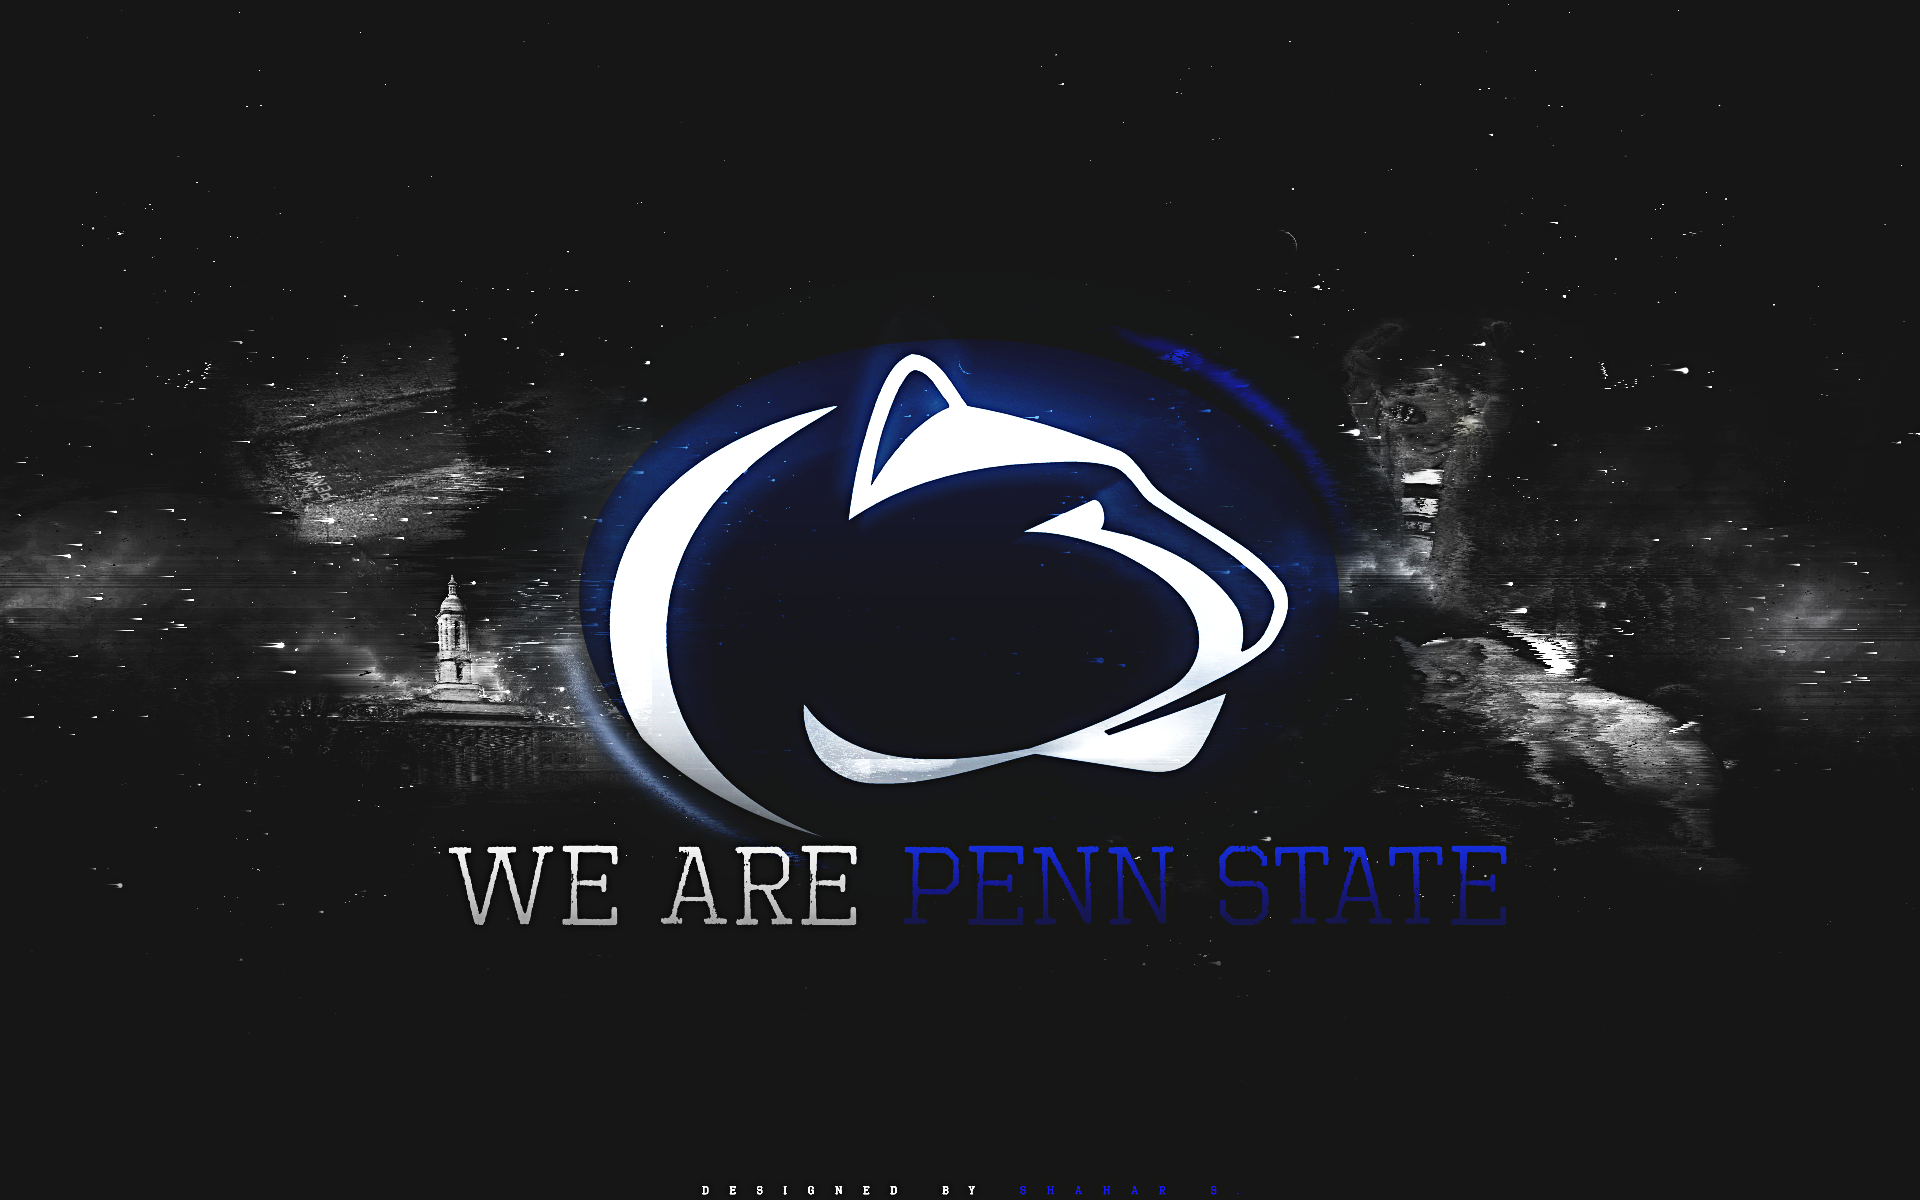 Penn State. Penn state football, Penn state, Penn state nittany lions football